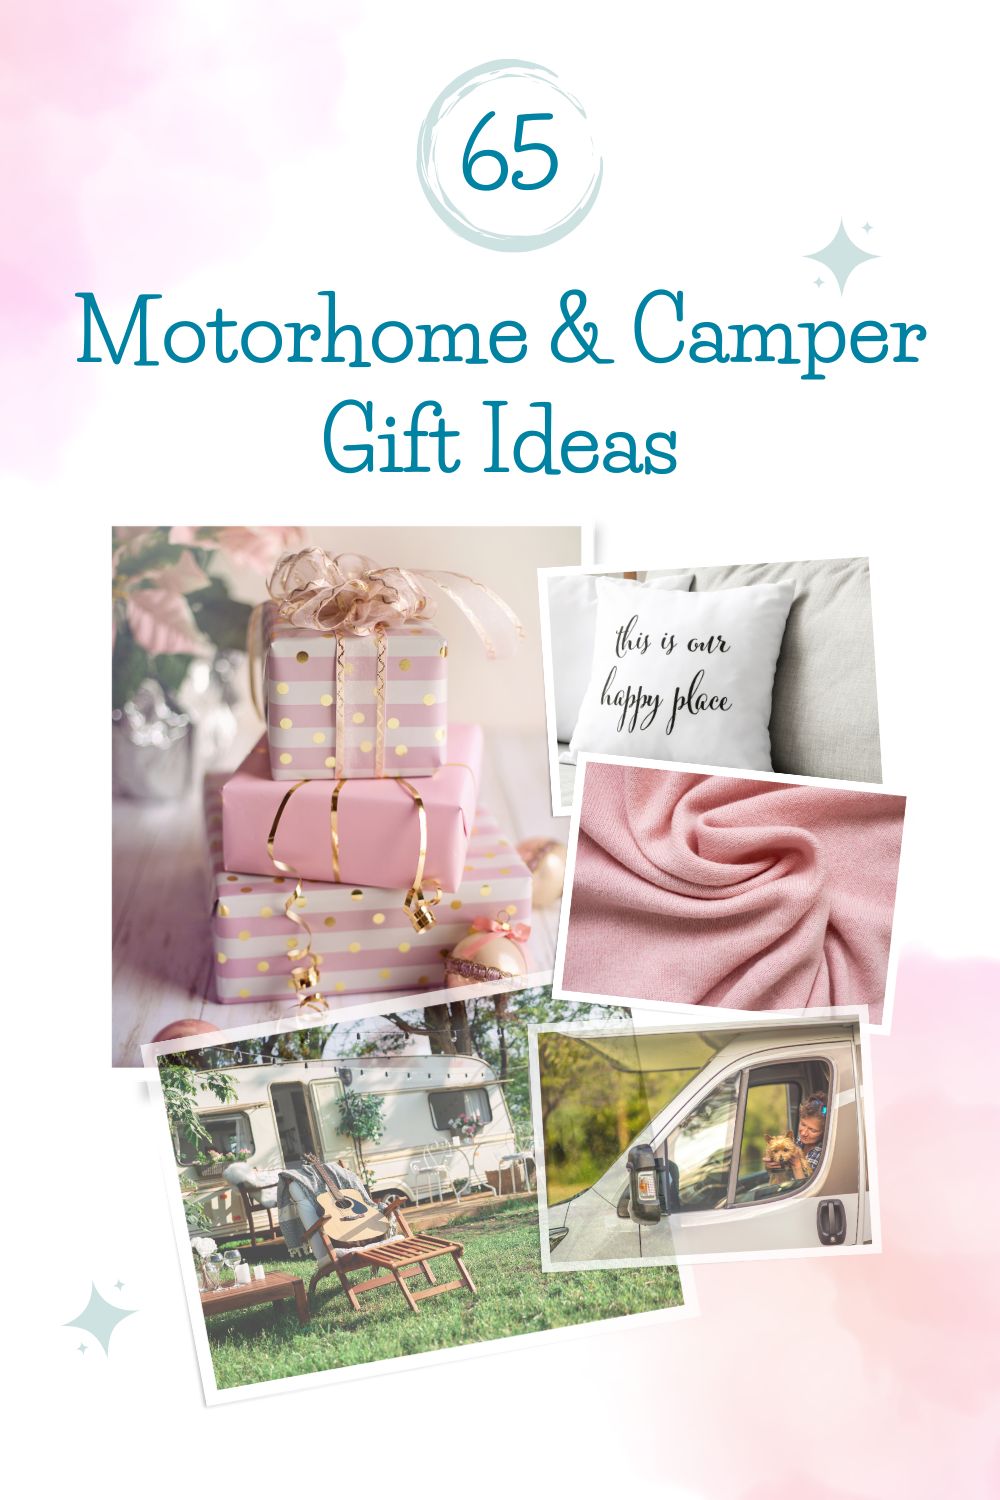 Camper and Motorhome Gift Ideas Pinterest Pin